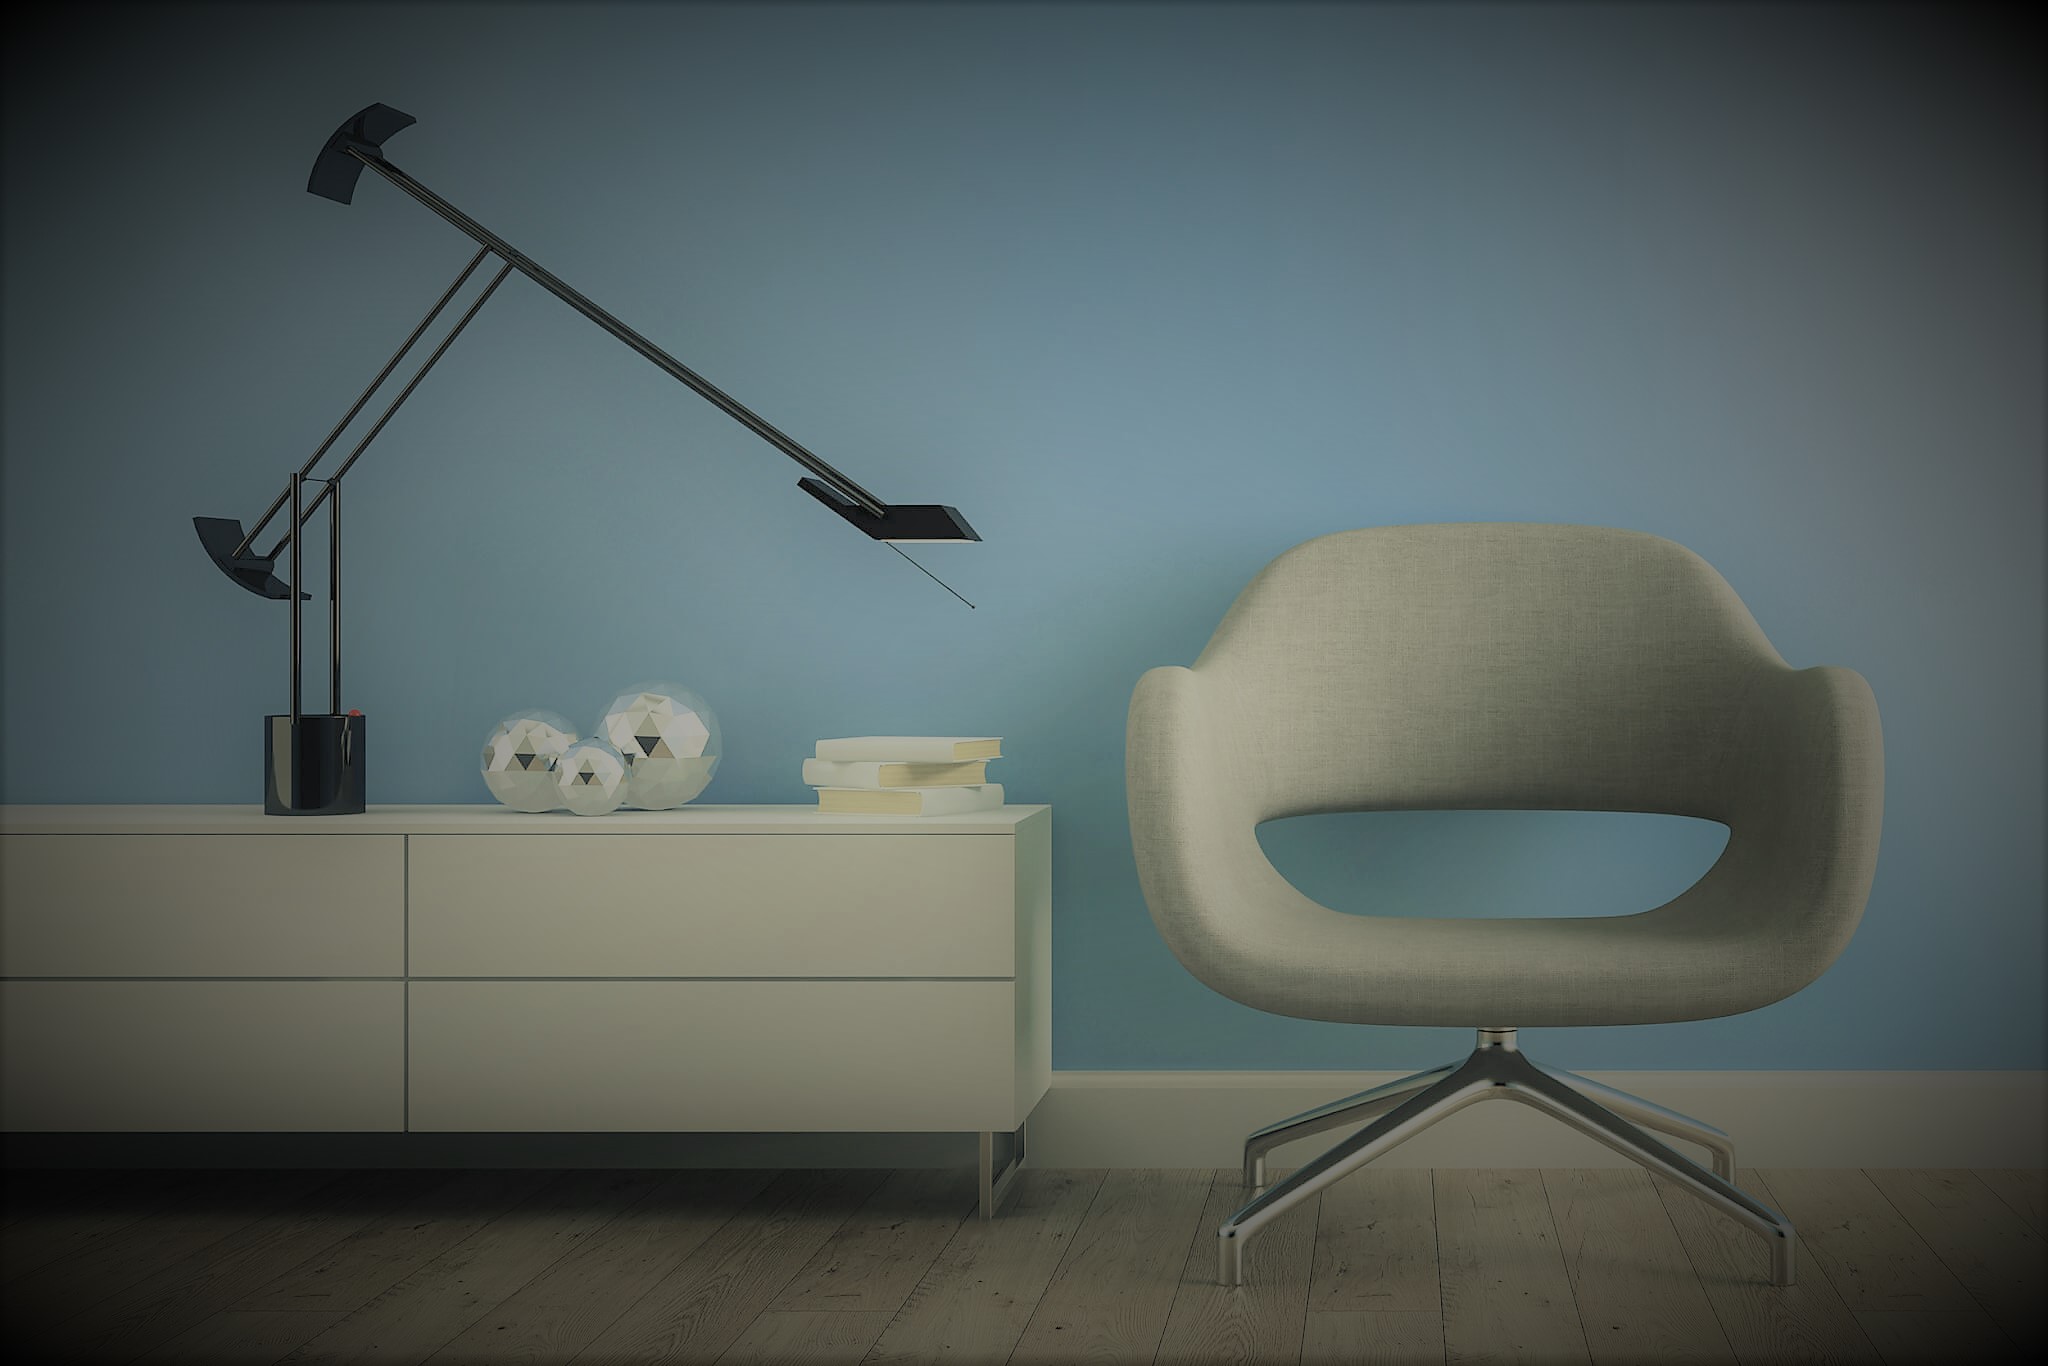 https://planicon.net/wp-content/uploads/2020/07/temny_image-chair-blue-wall.jpg